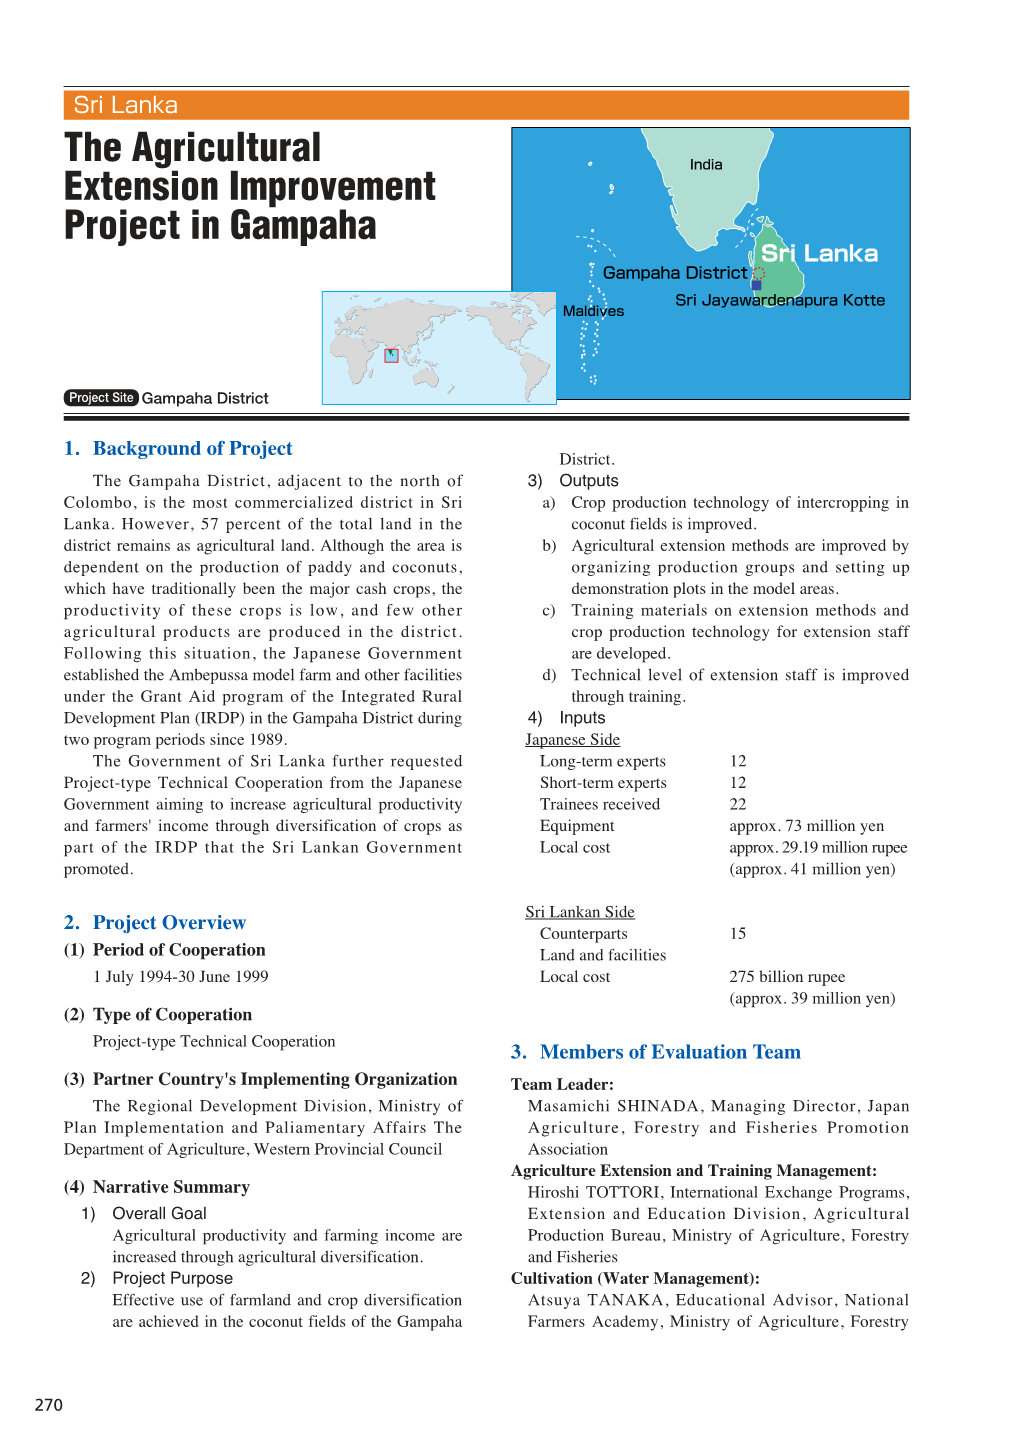 The Agricultural Extension Improvement Project in Gampaha